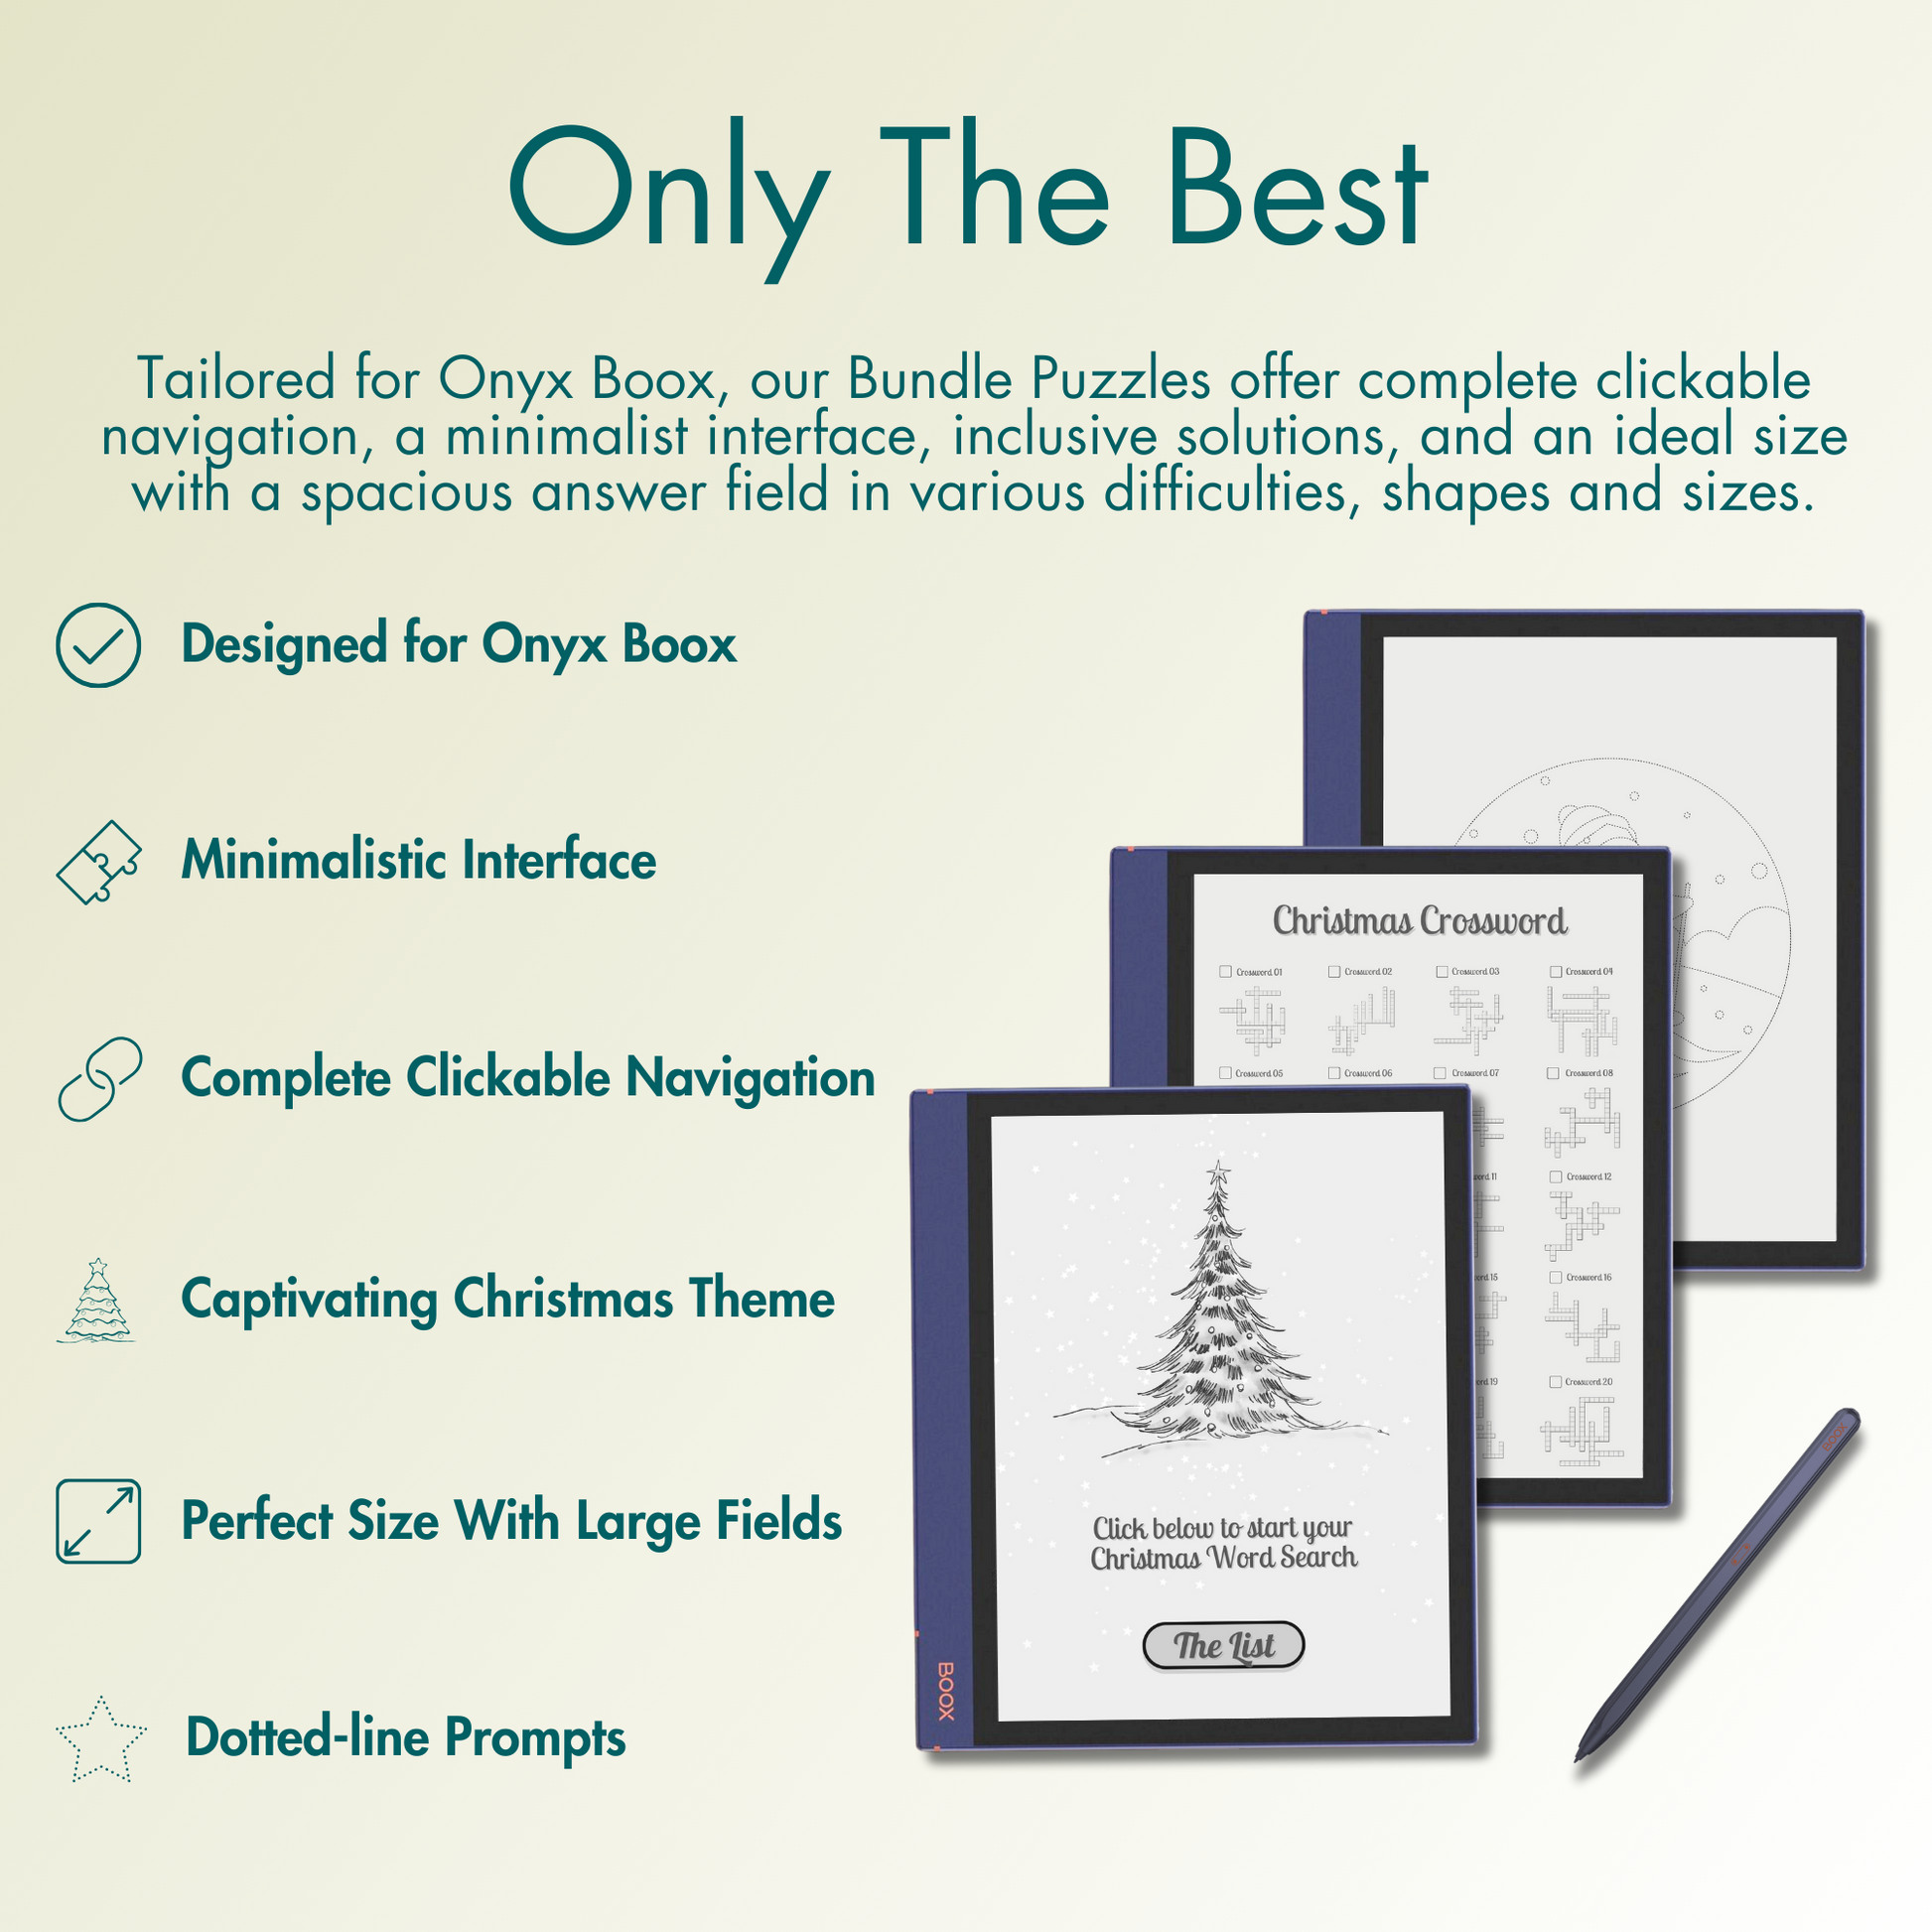 The Bundle offers complete clickable navigation, a minimalist interface, inclusive solutions, and an ideal size with a spacious answer field in various holiday-themed difficulties, shapes, and sizes for Onyx Boox's e-ink screen, perfect for adding festive cheer to your holiday season.